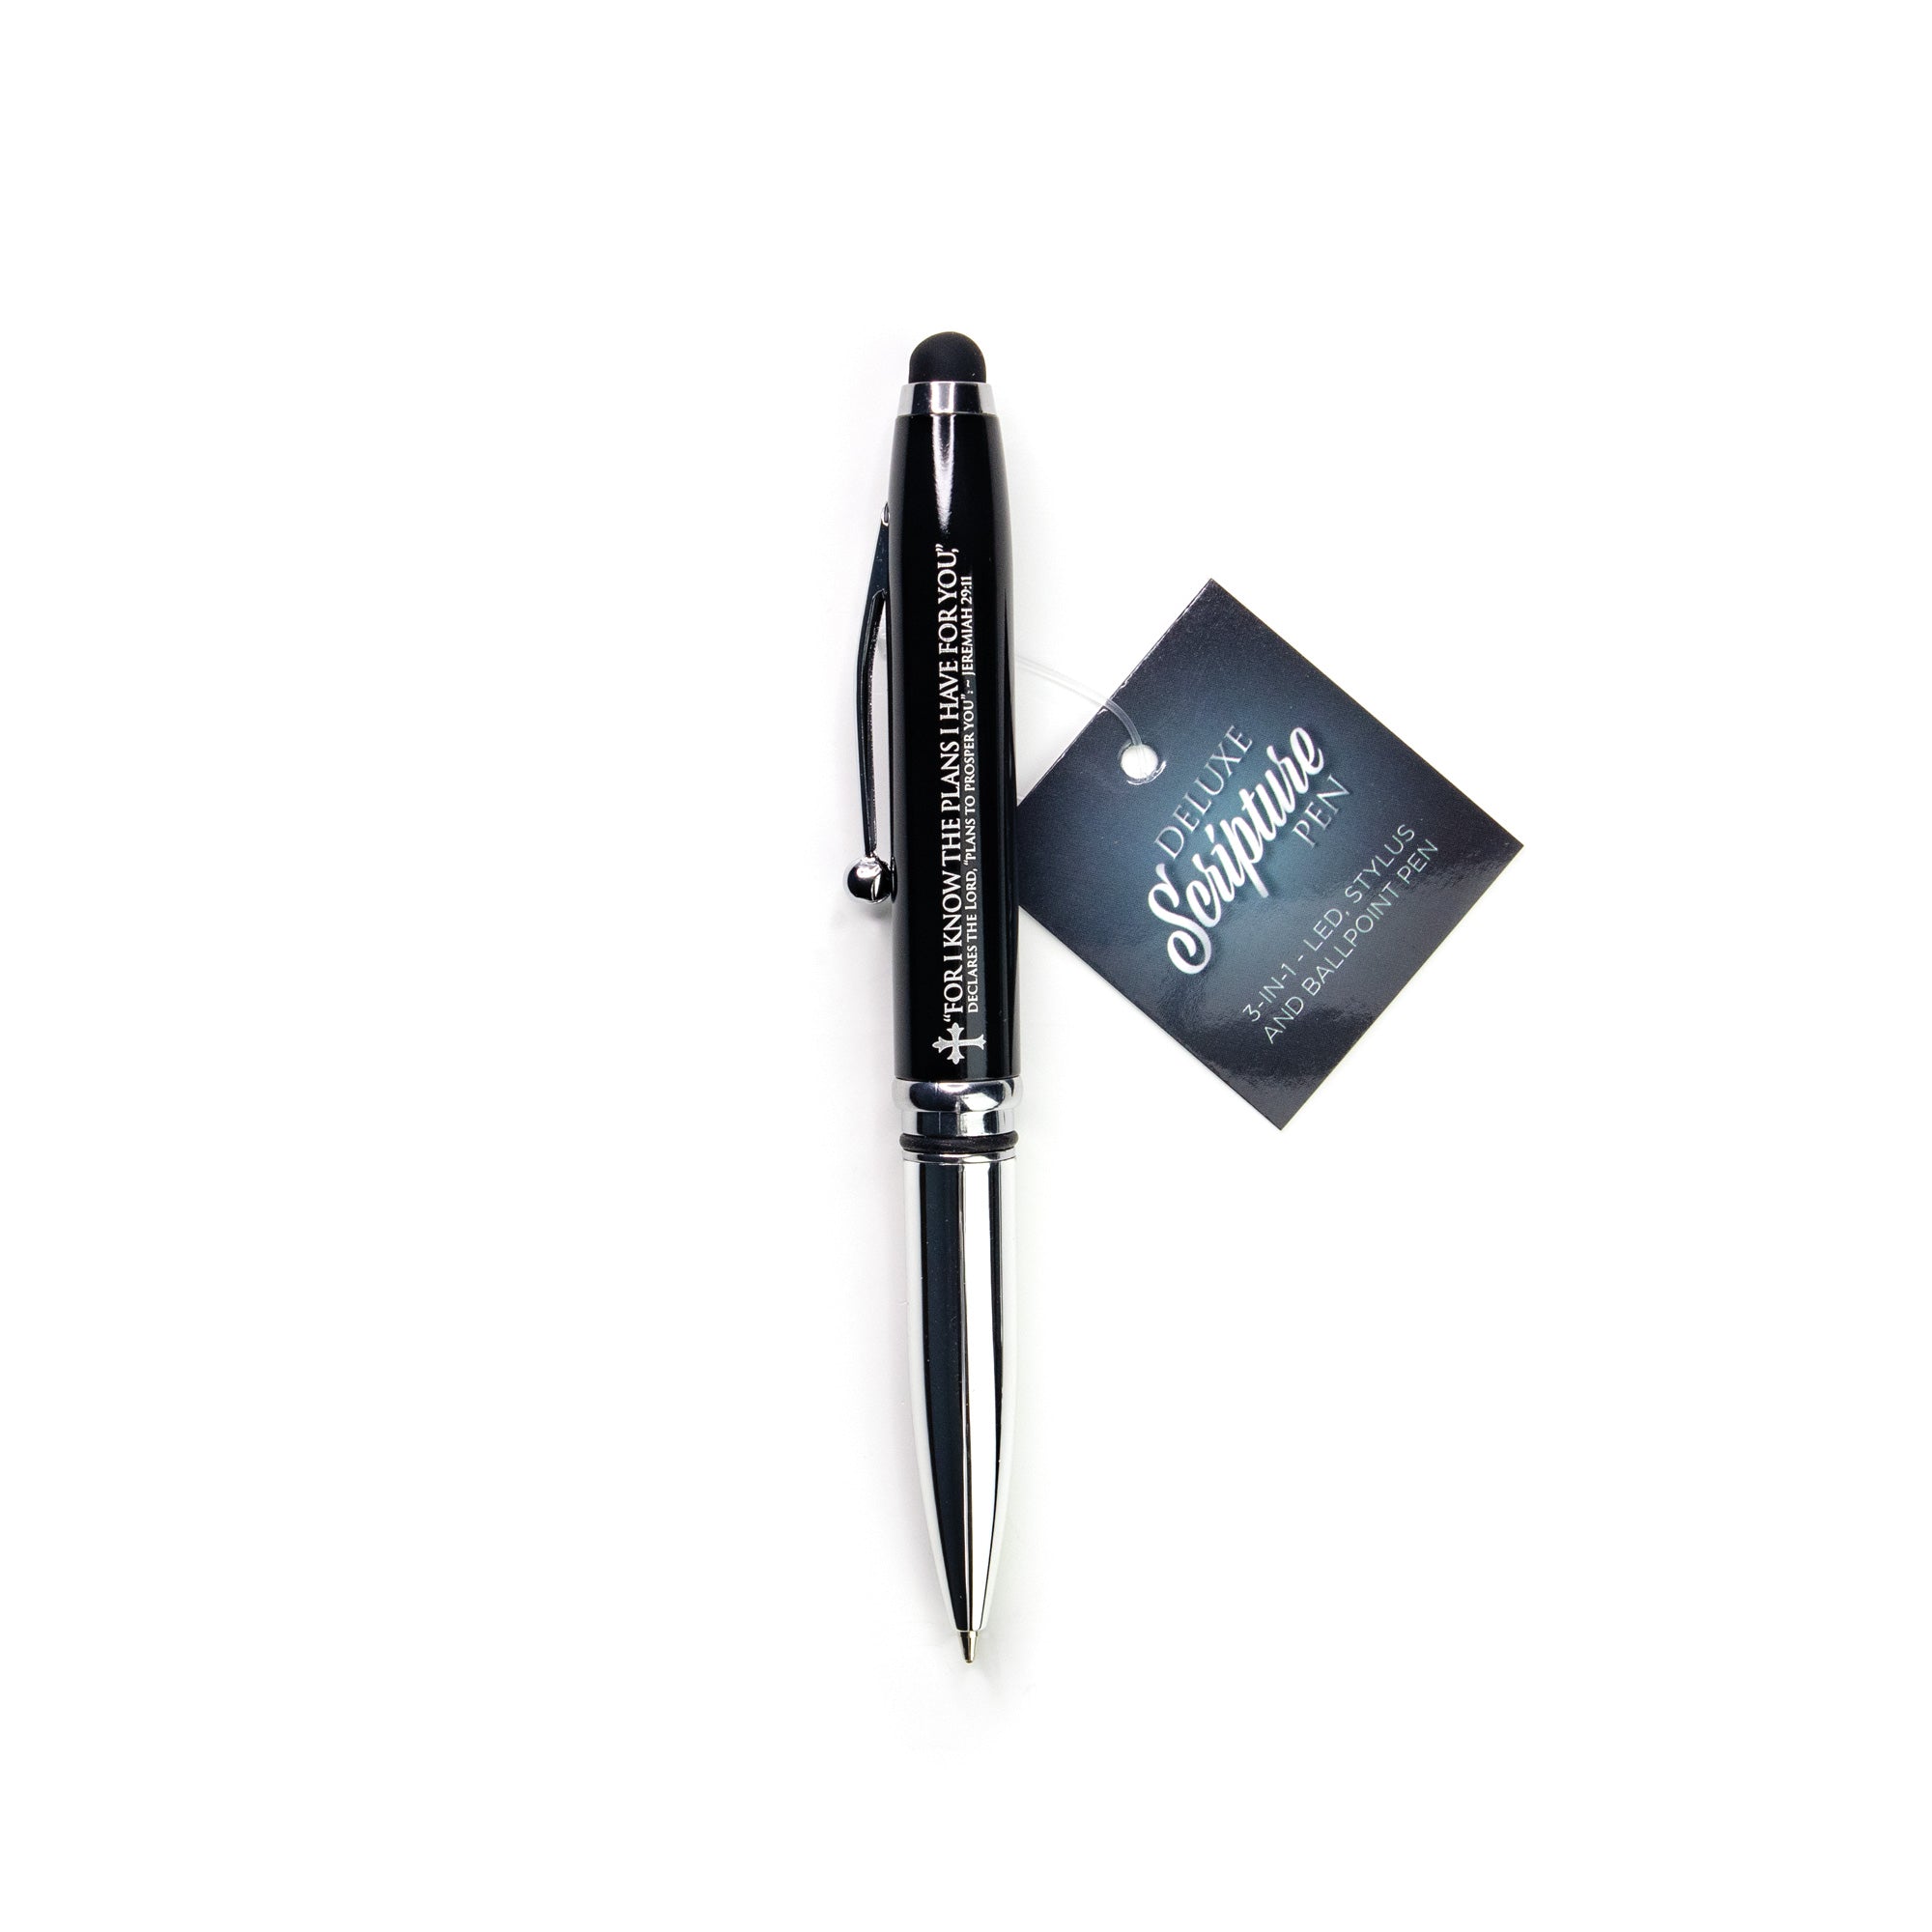 Jeremiah 29:11 Deluxe Scripture Pen with Stylus, LED Light and Scripture Card - Black